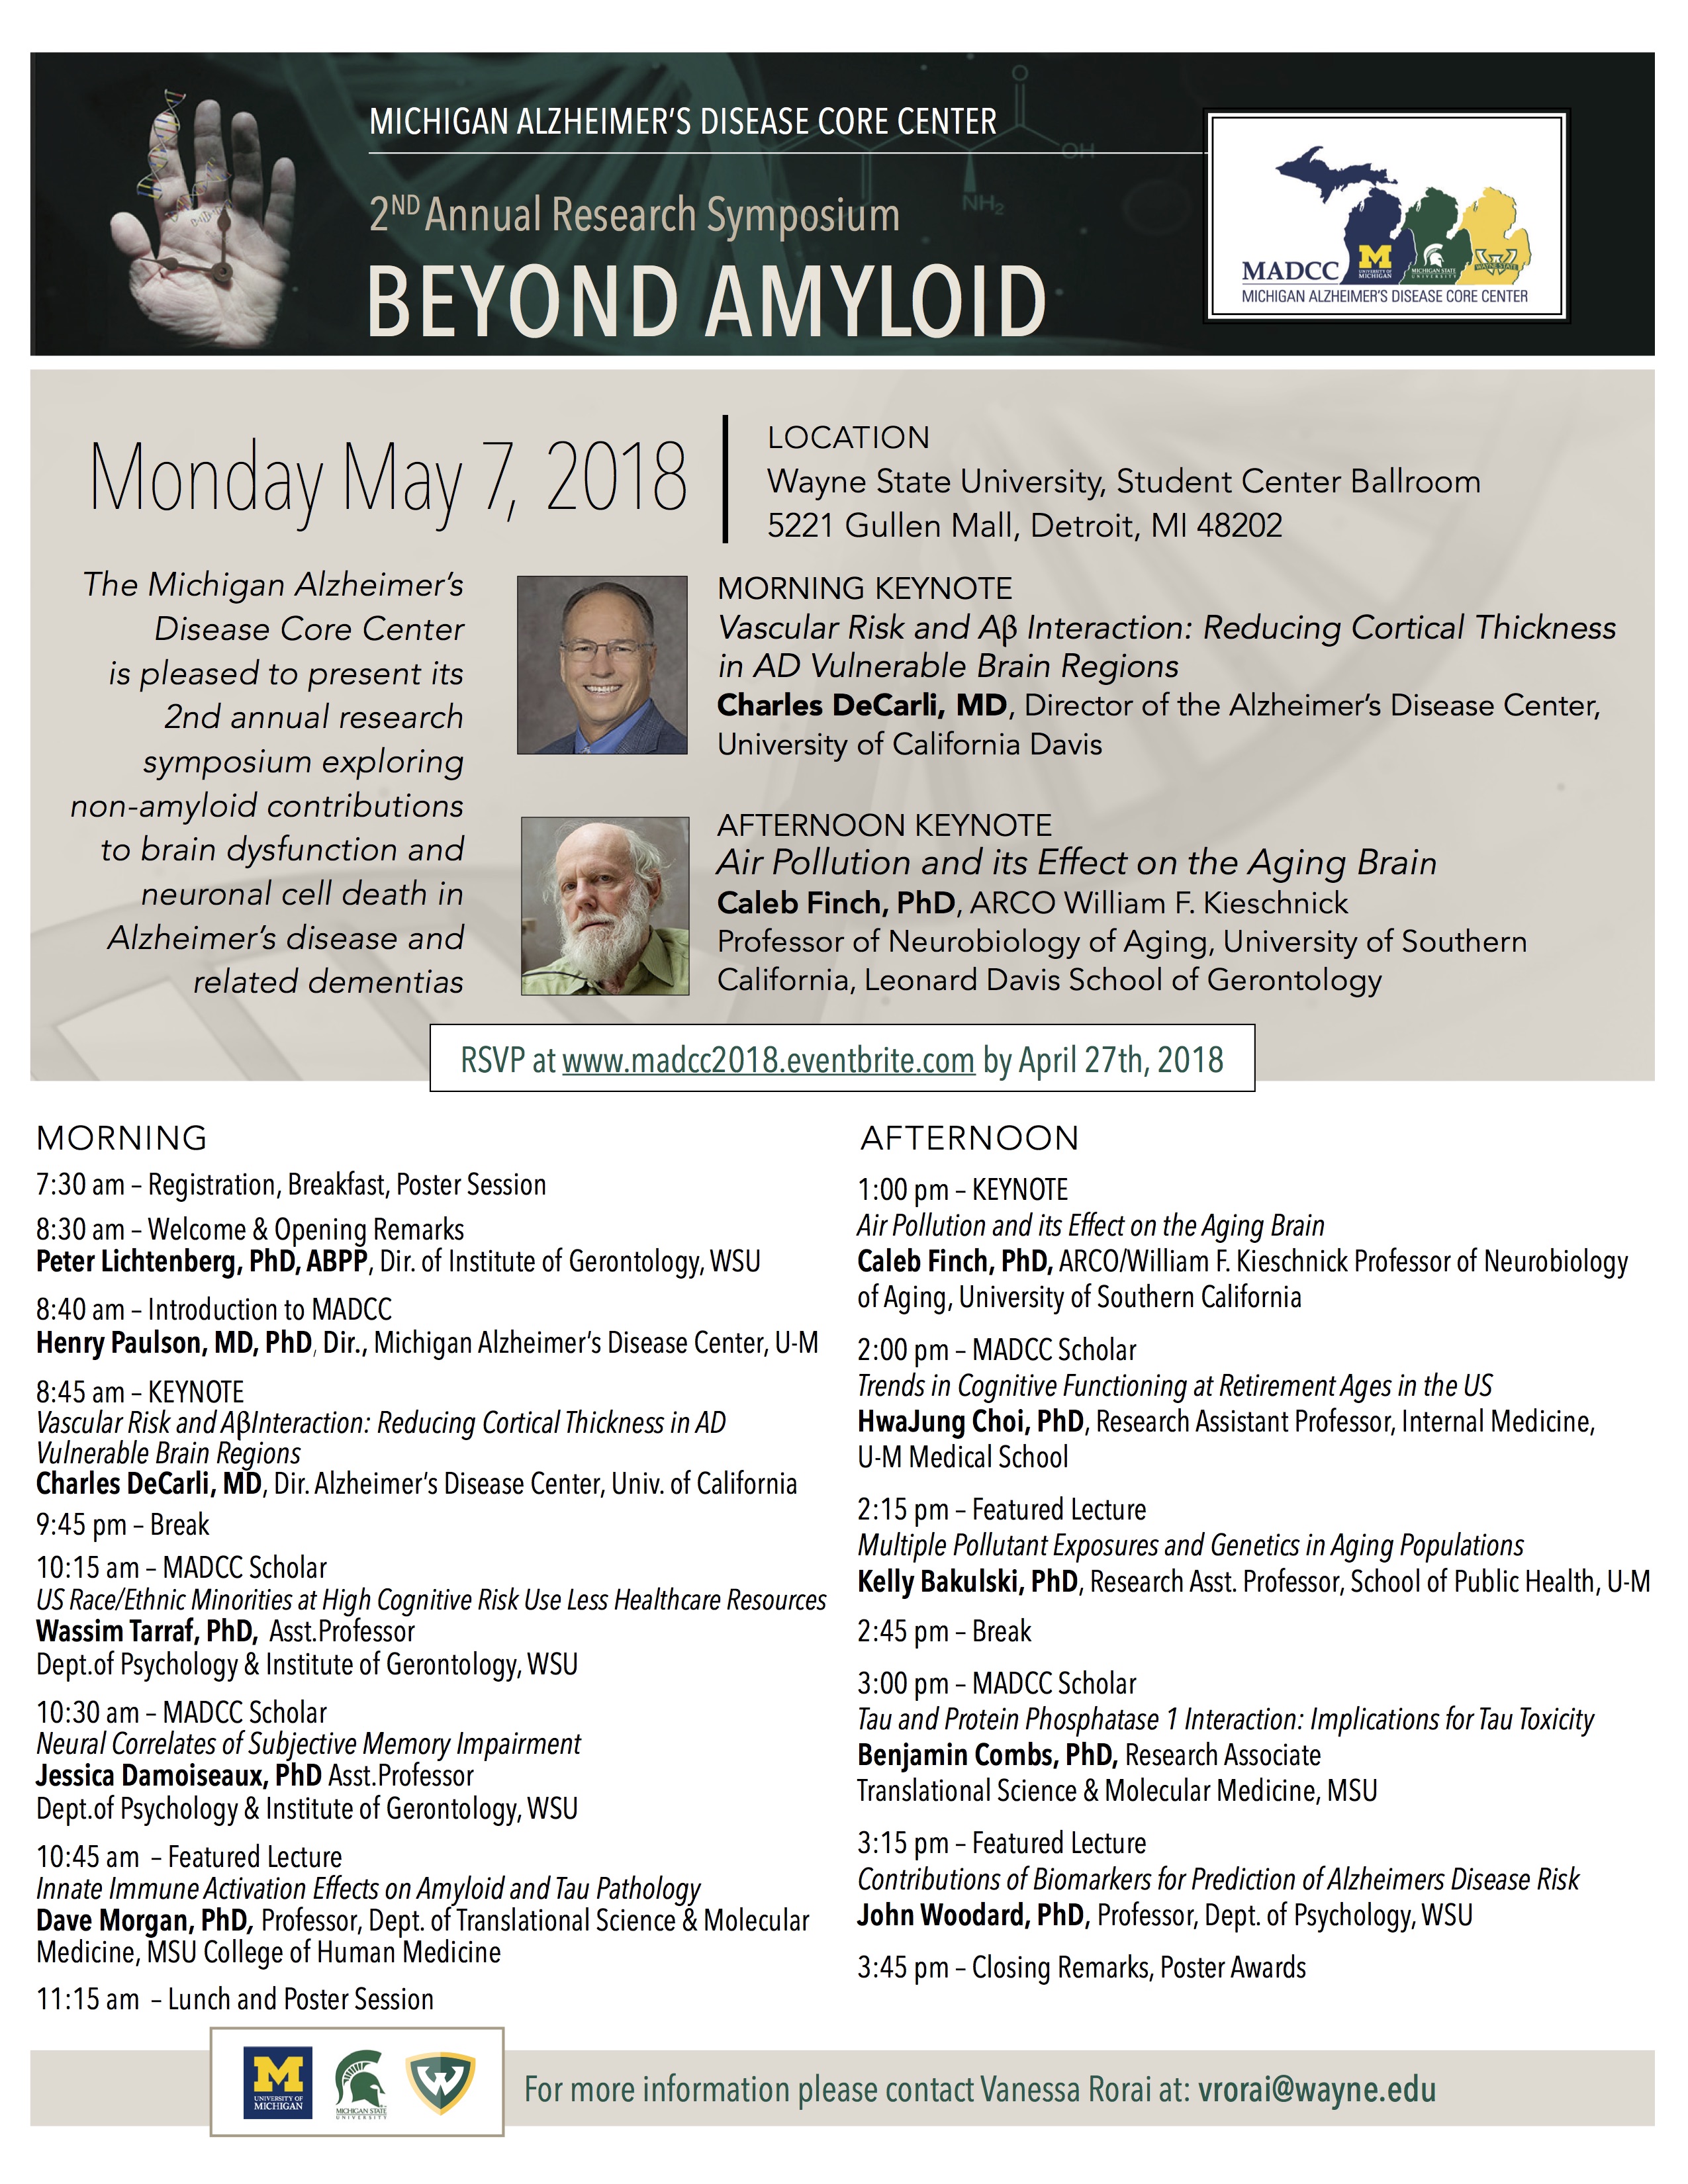 Schedule for Beyond Amyloid Symposium